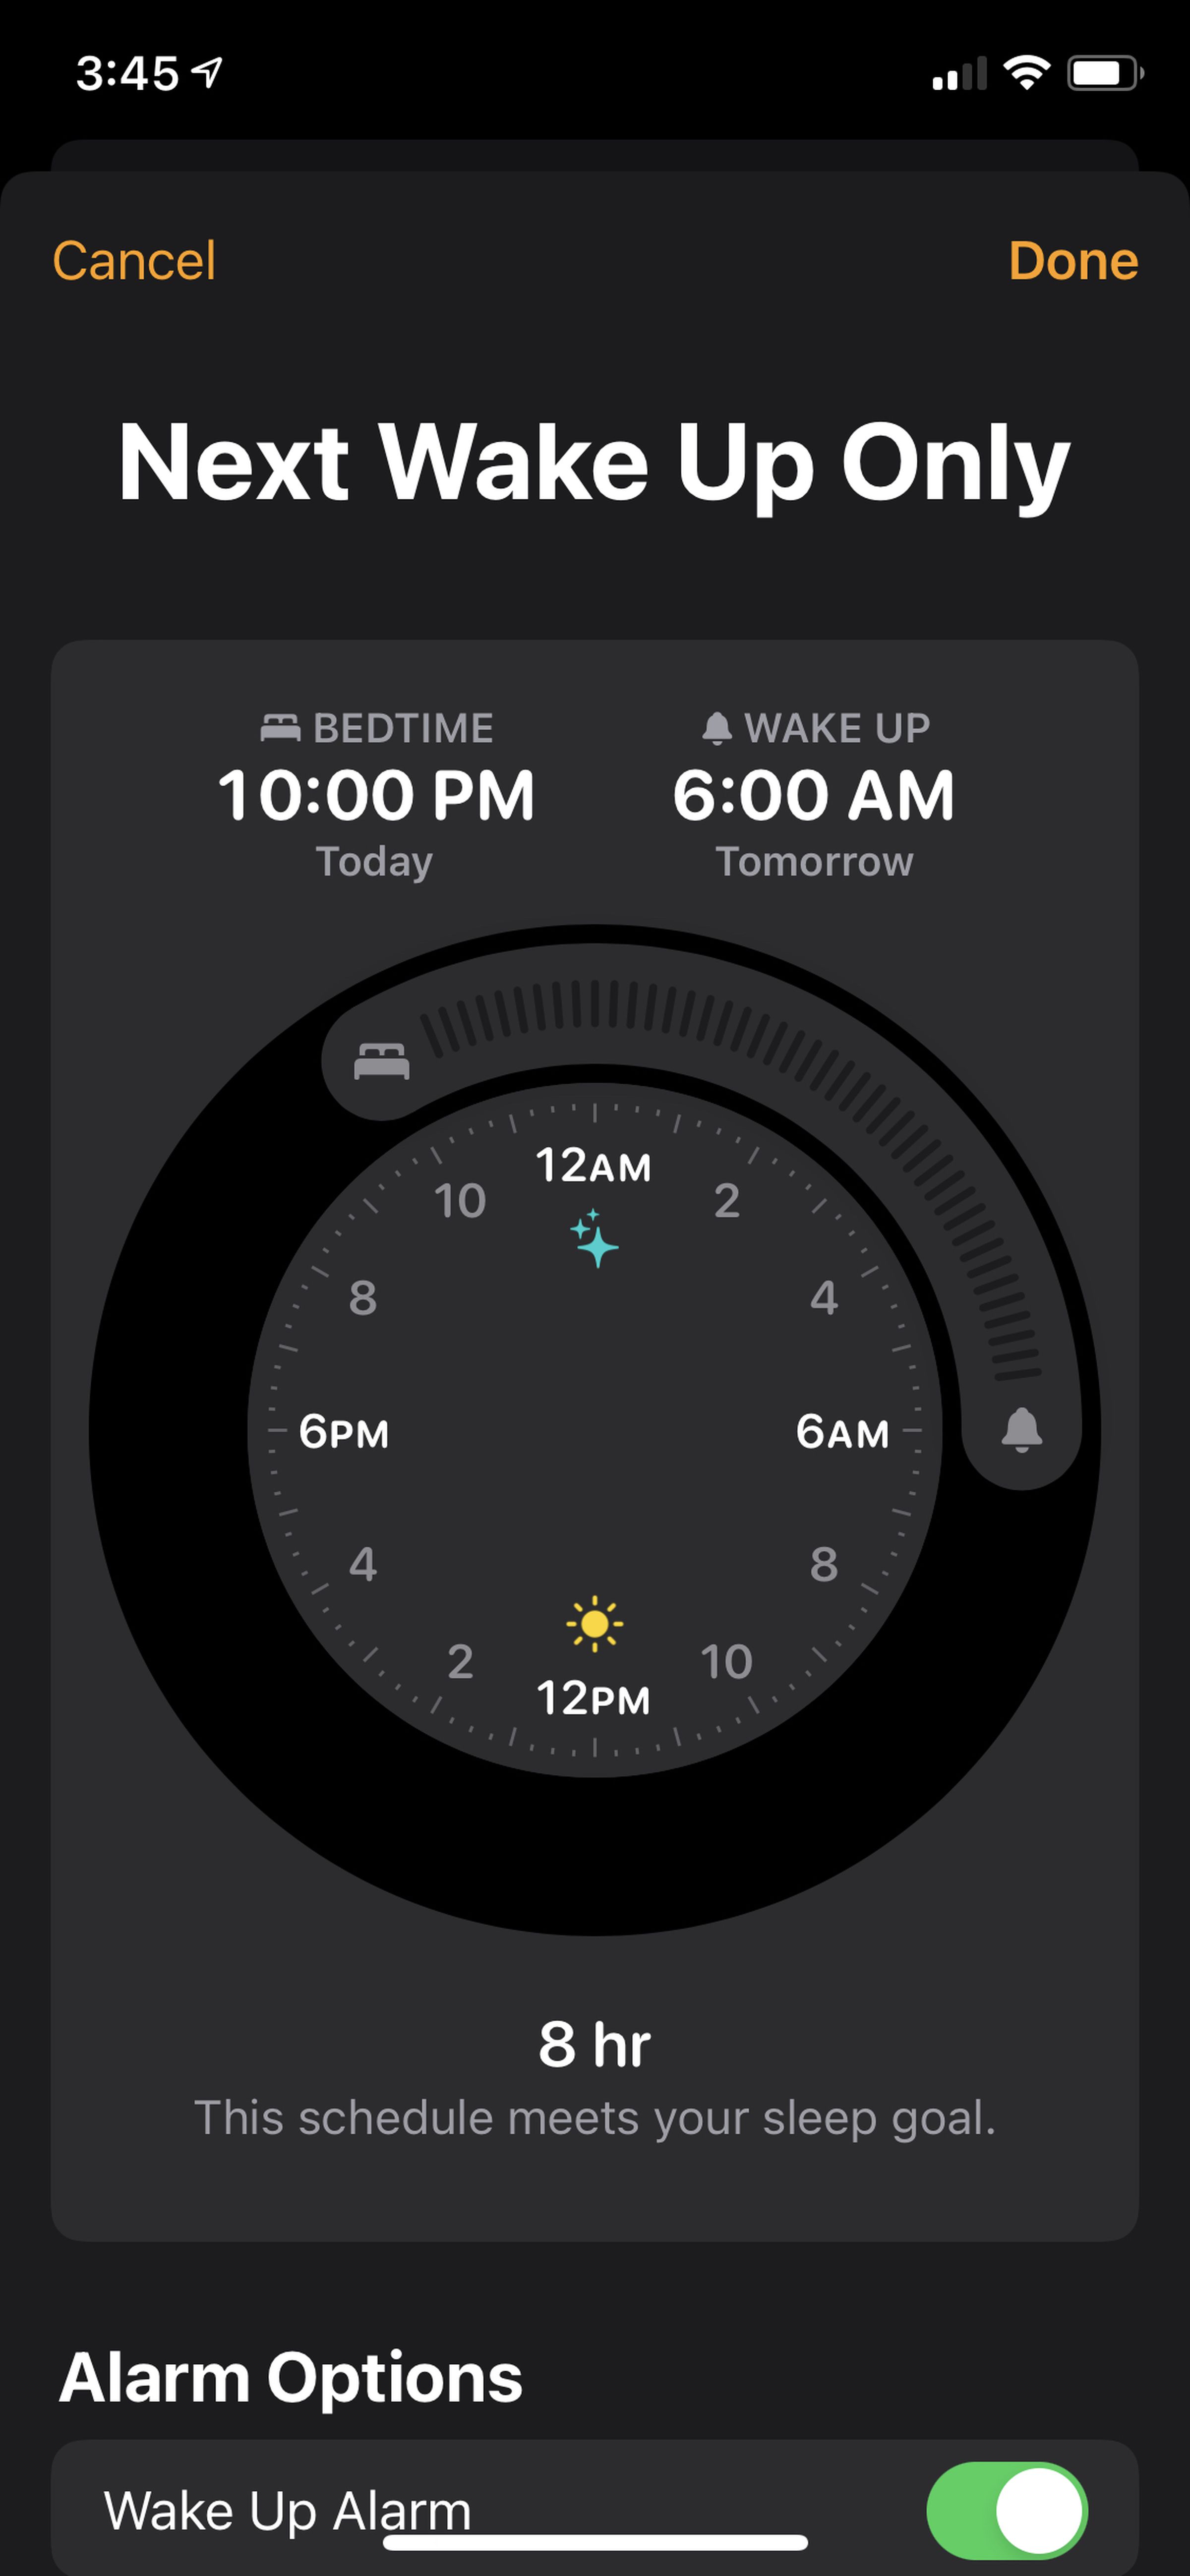 Apple has a new bedtime feature that works but is restrictive when it comes to DND options.